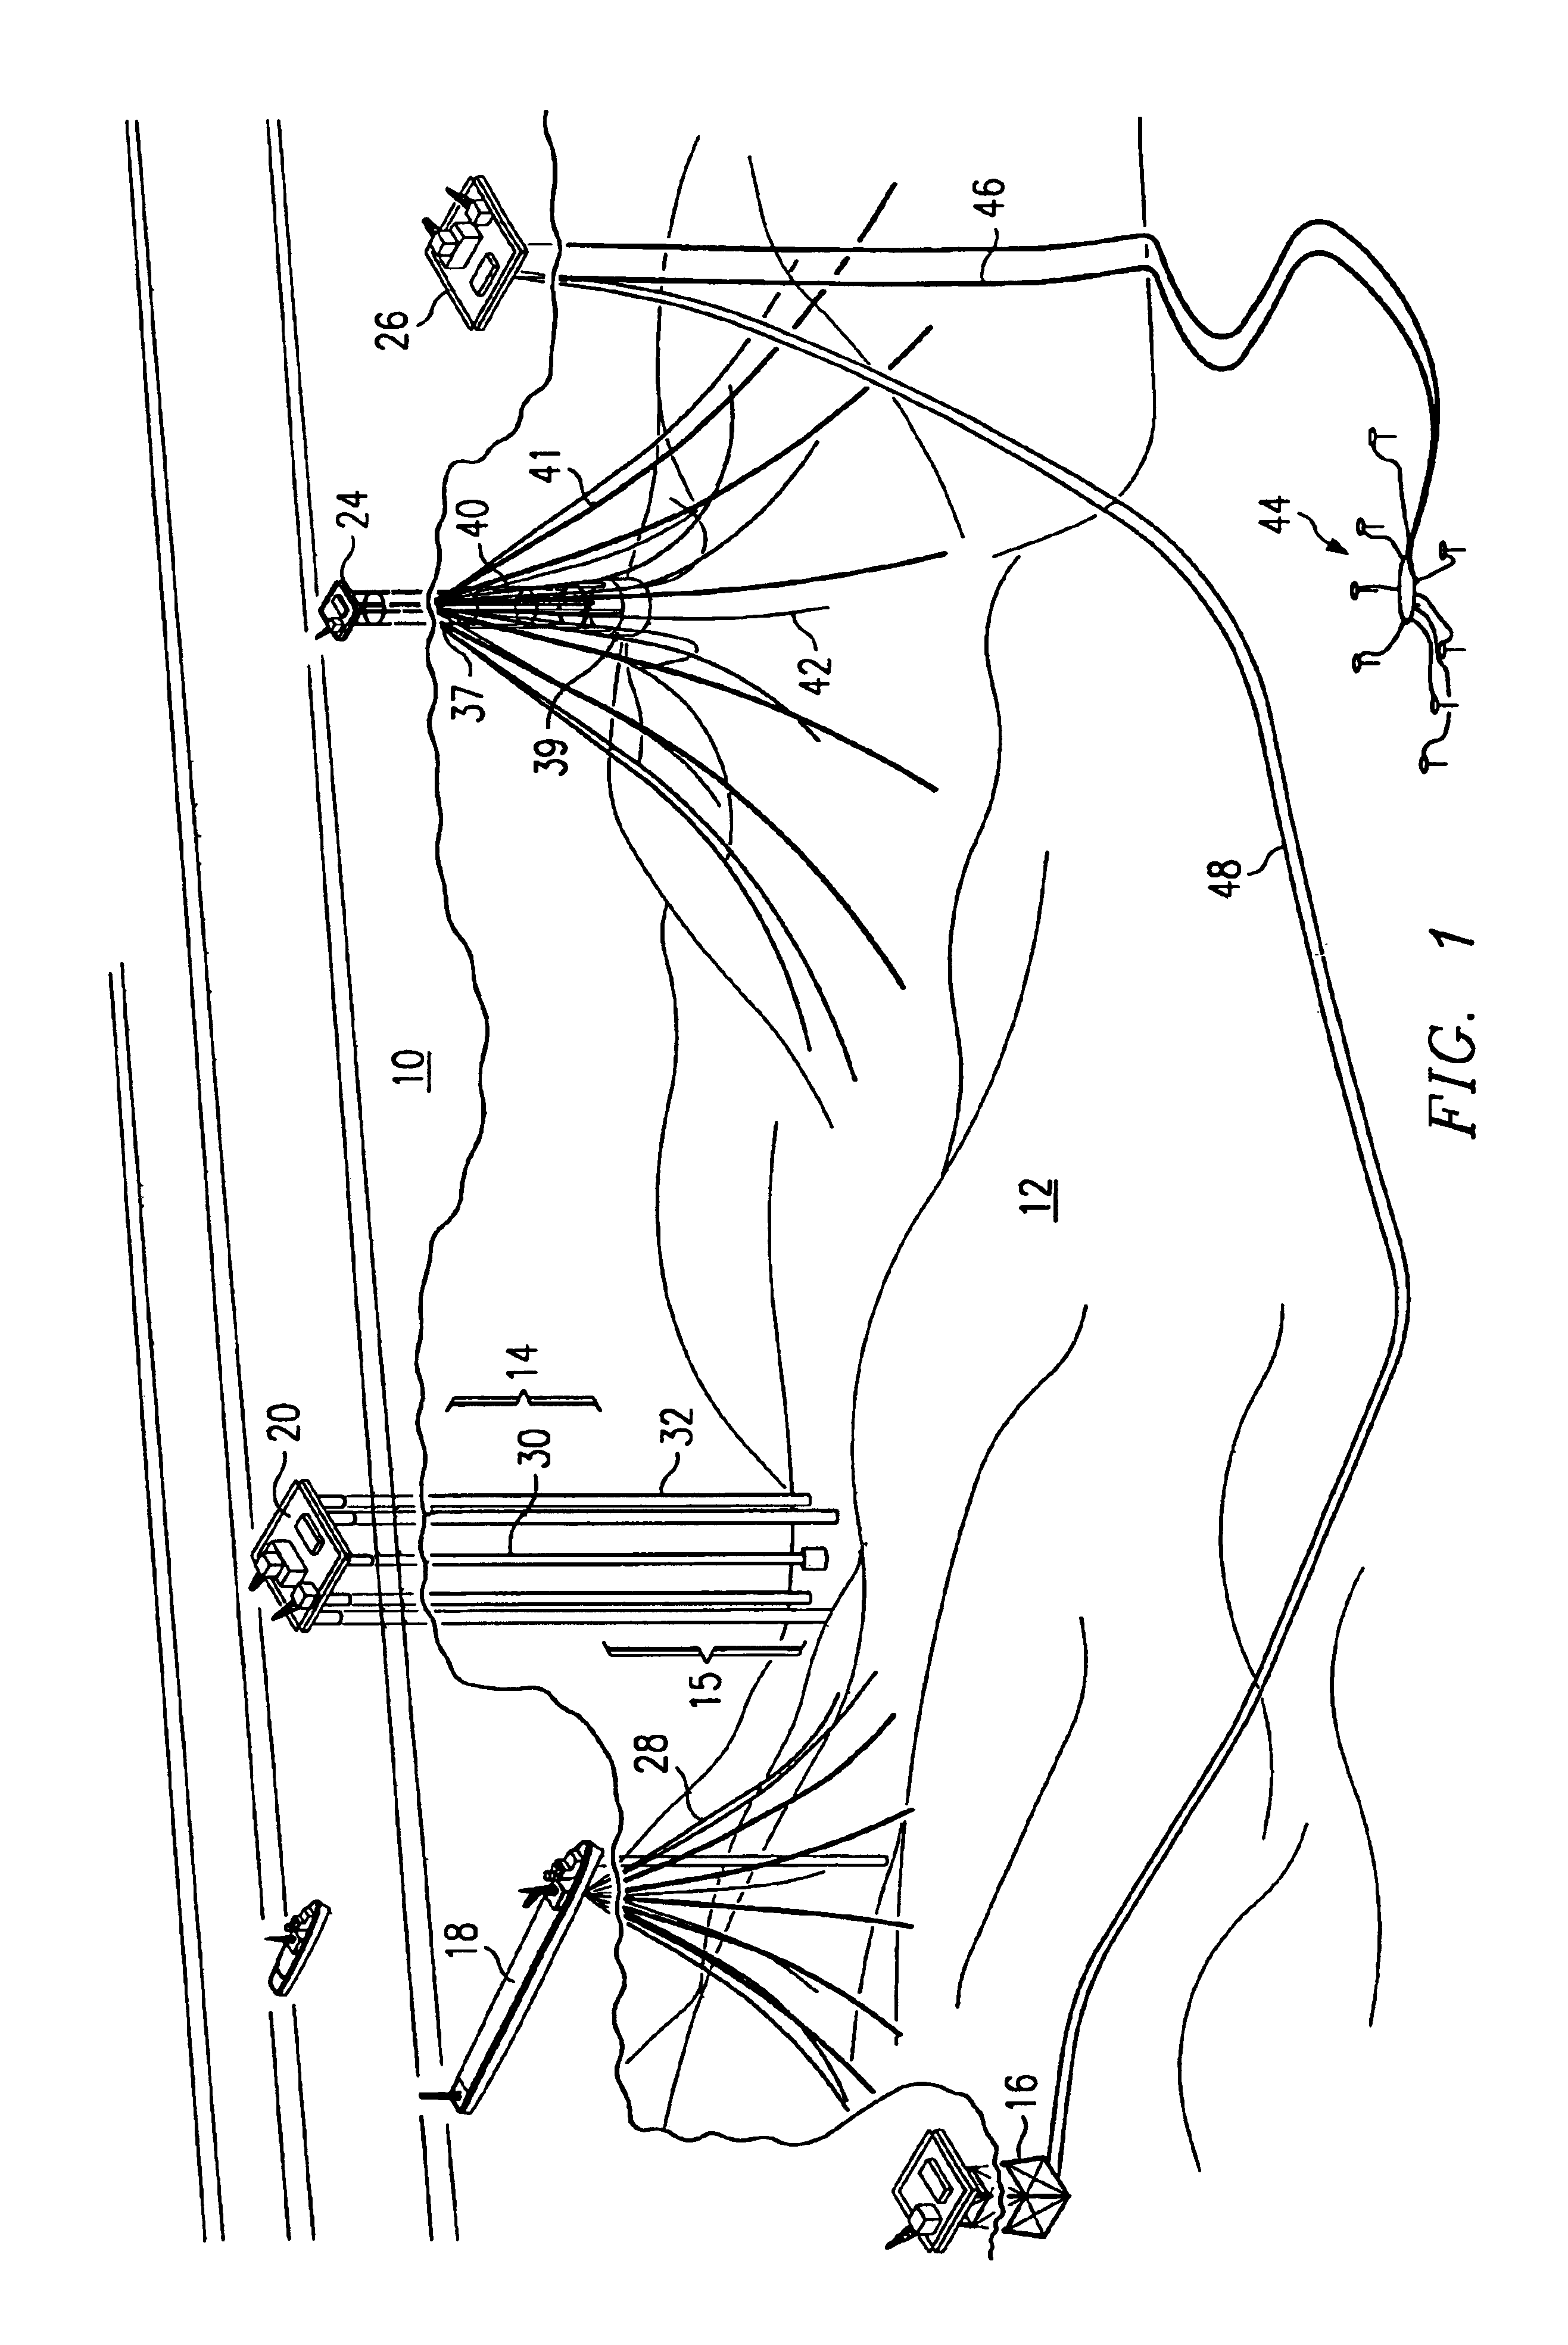 Vortex-induced vibration reduction device for fluid immersed cylinders